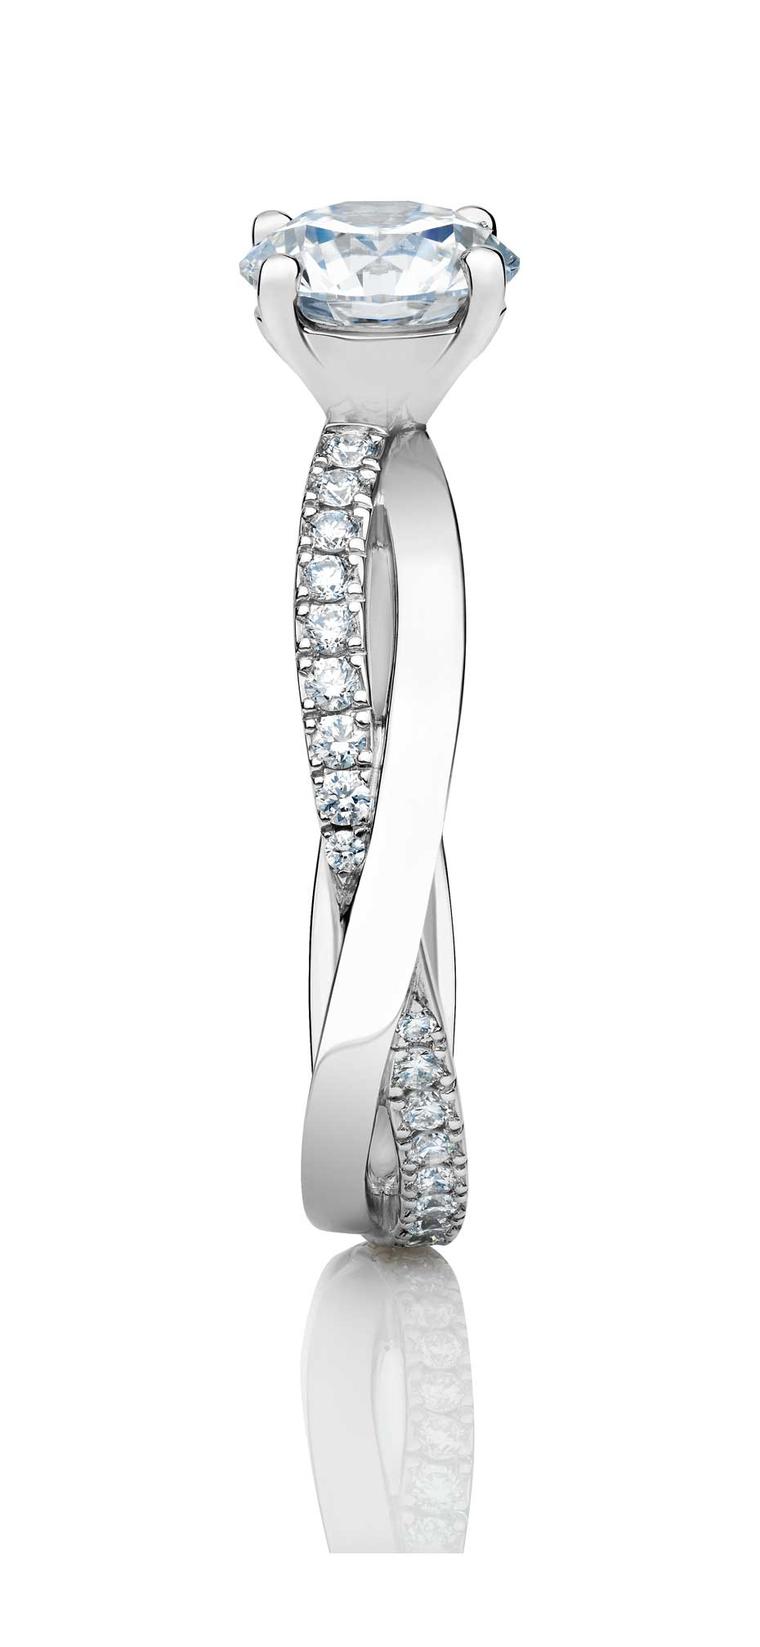 The new De Beers Infinity round diamond engagement ring is topped with a round brilliant-cut solitaire diamond.